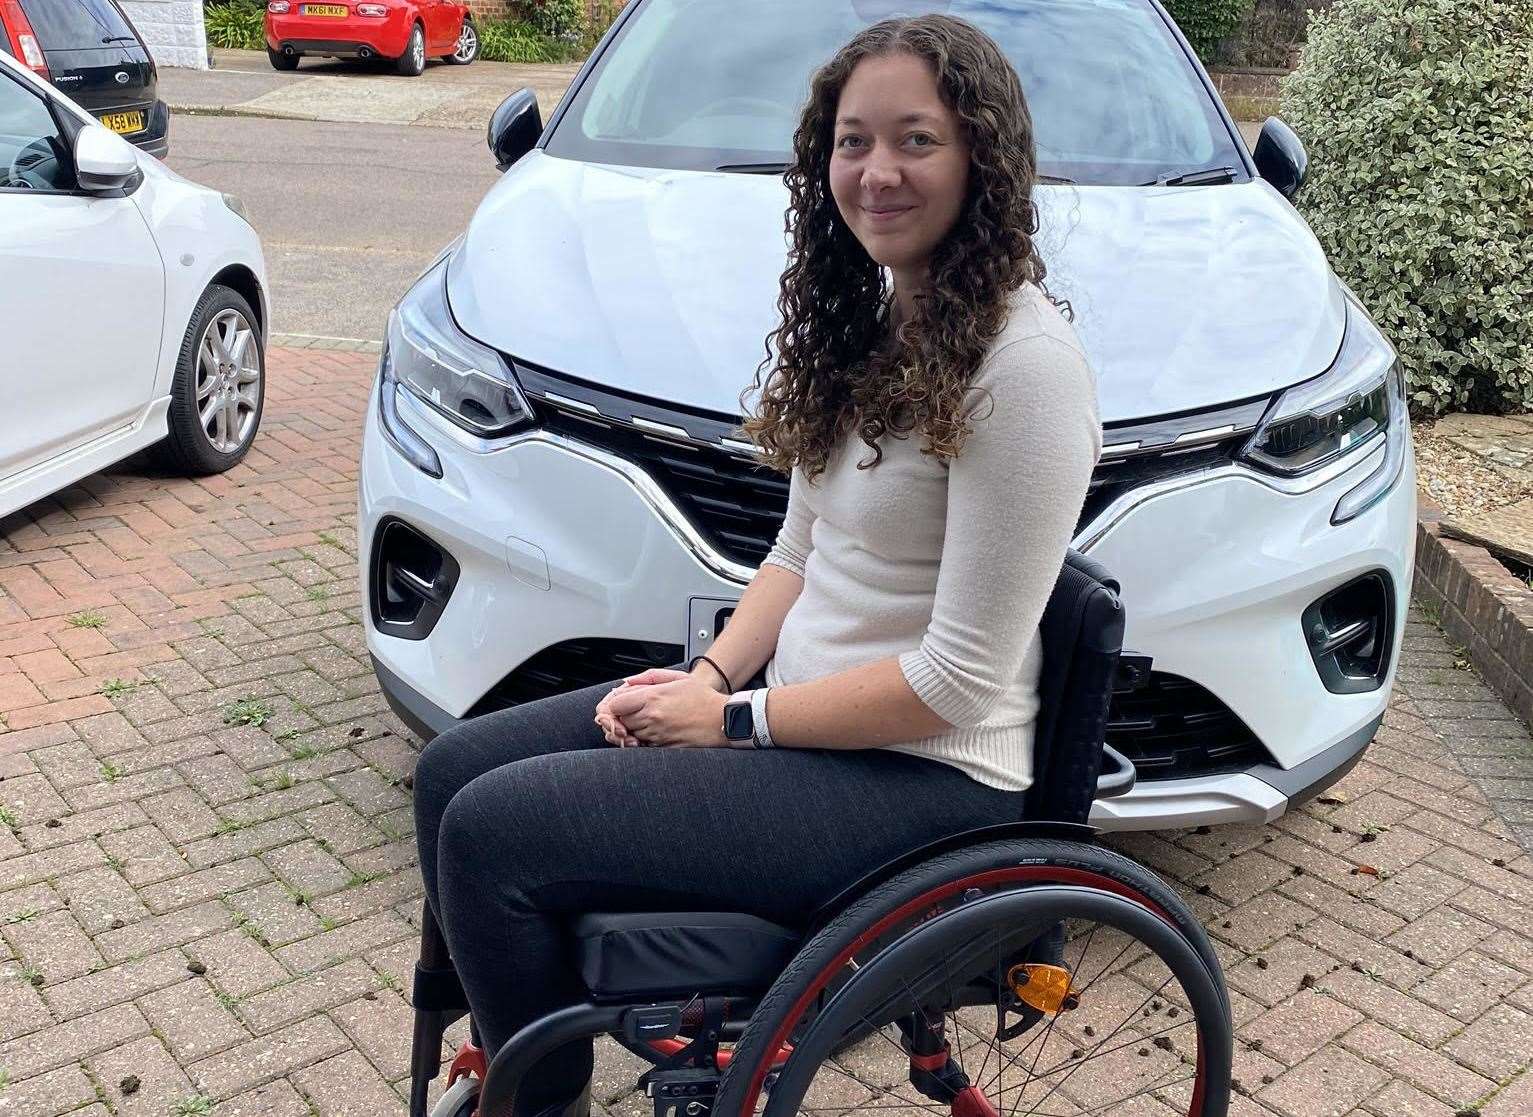 The 29-year-old has to get about using a wheelchair